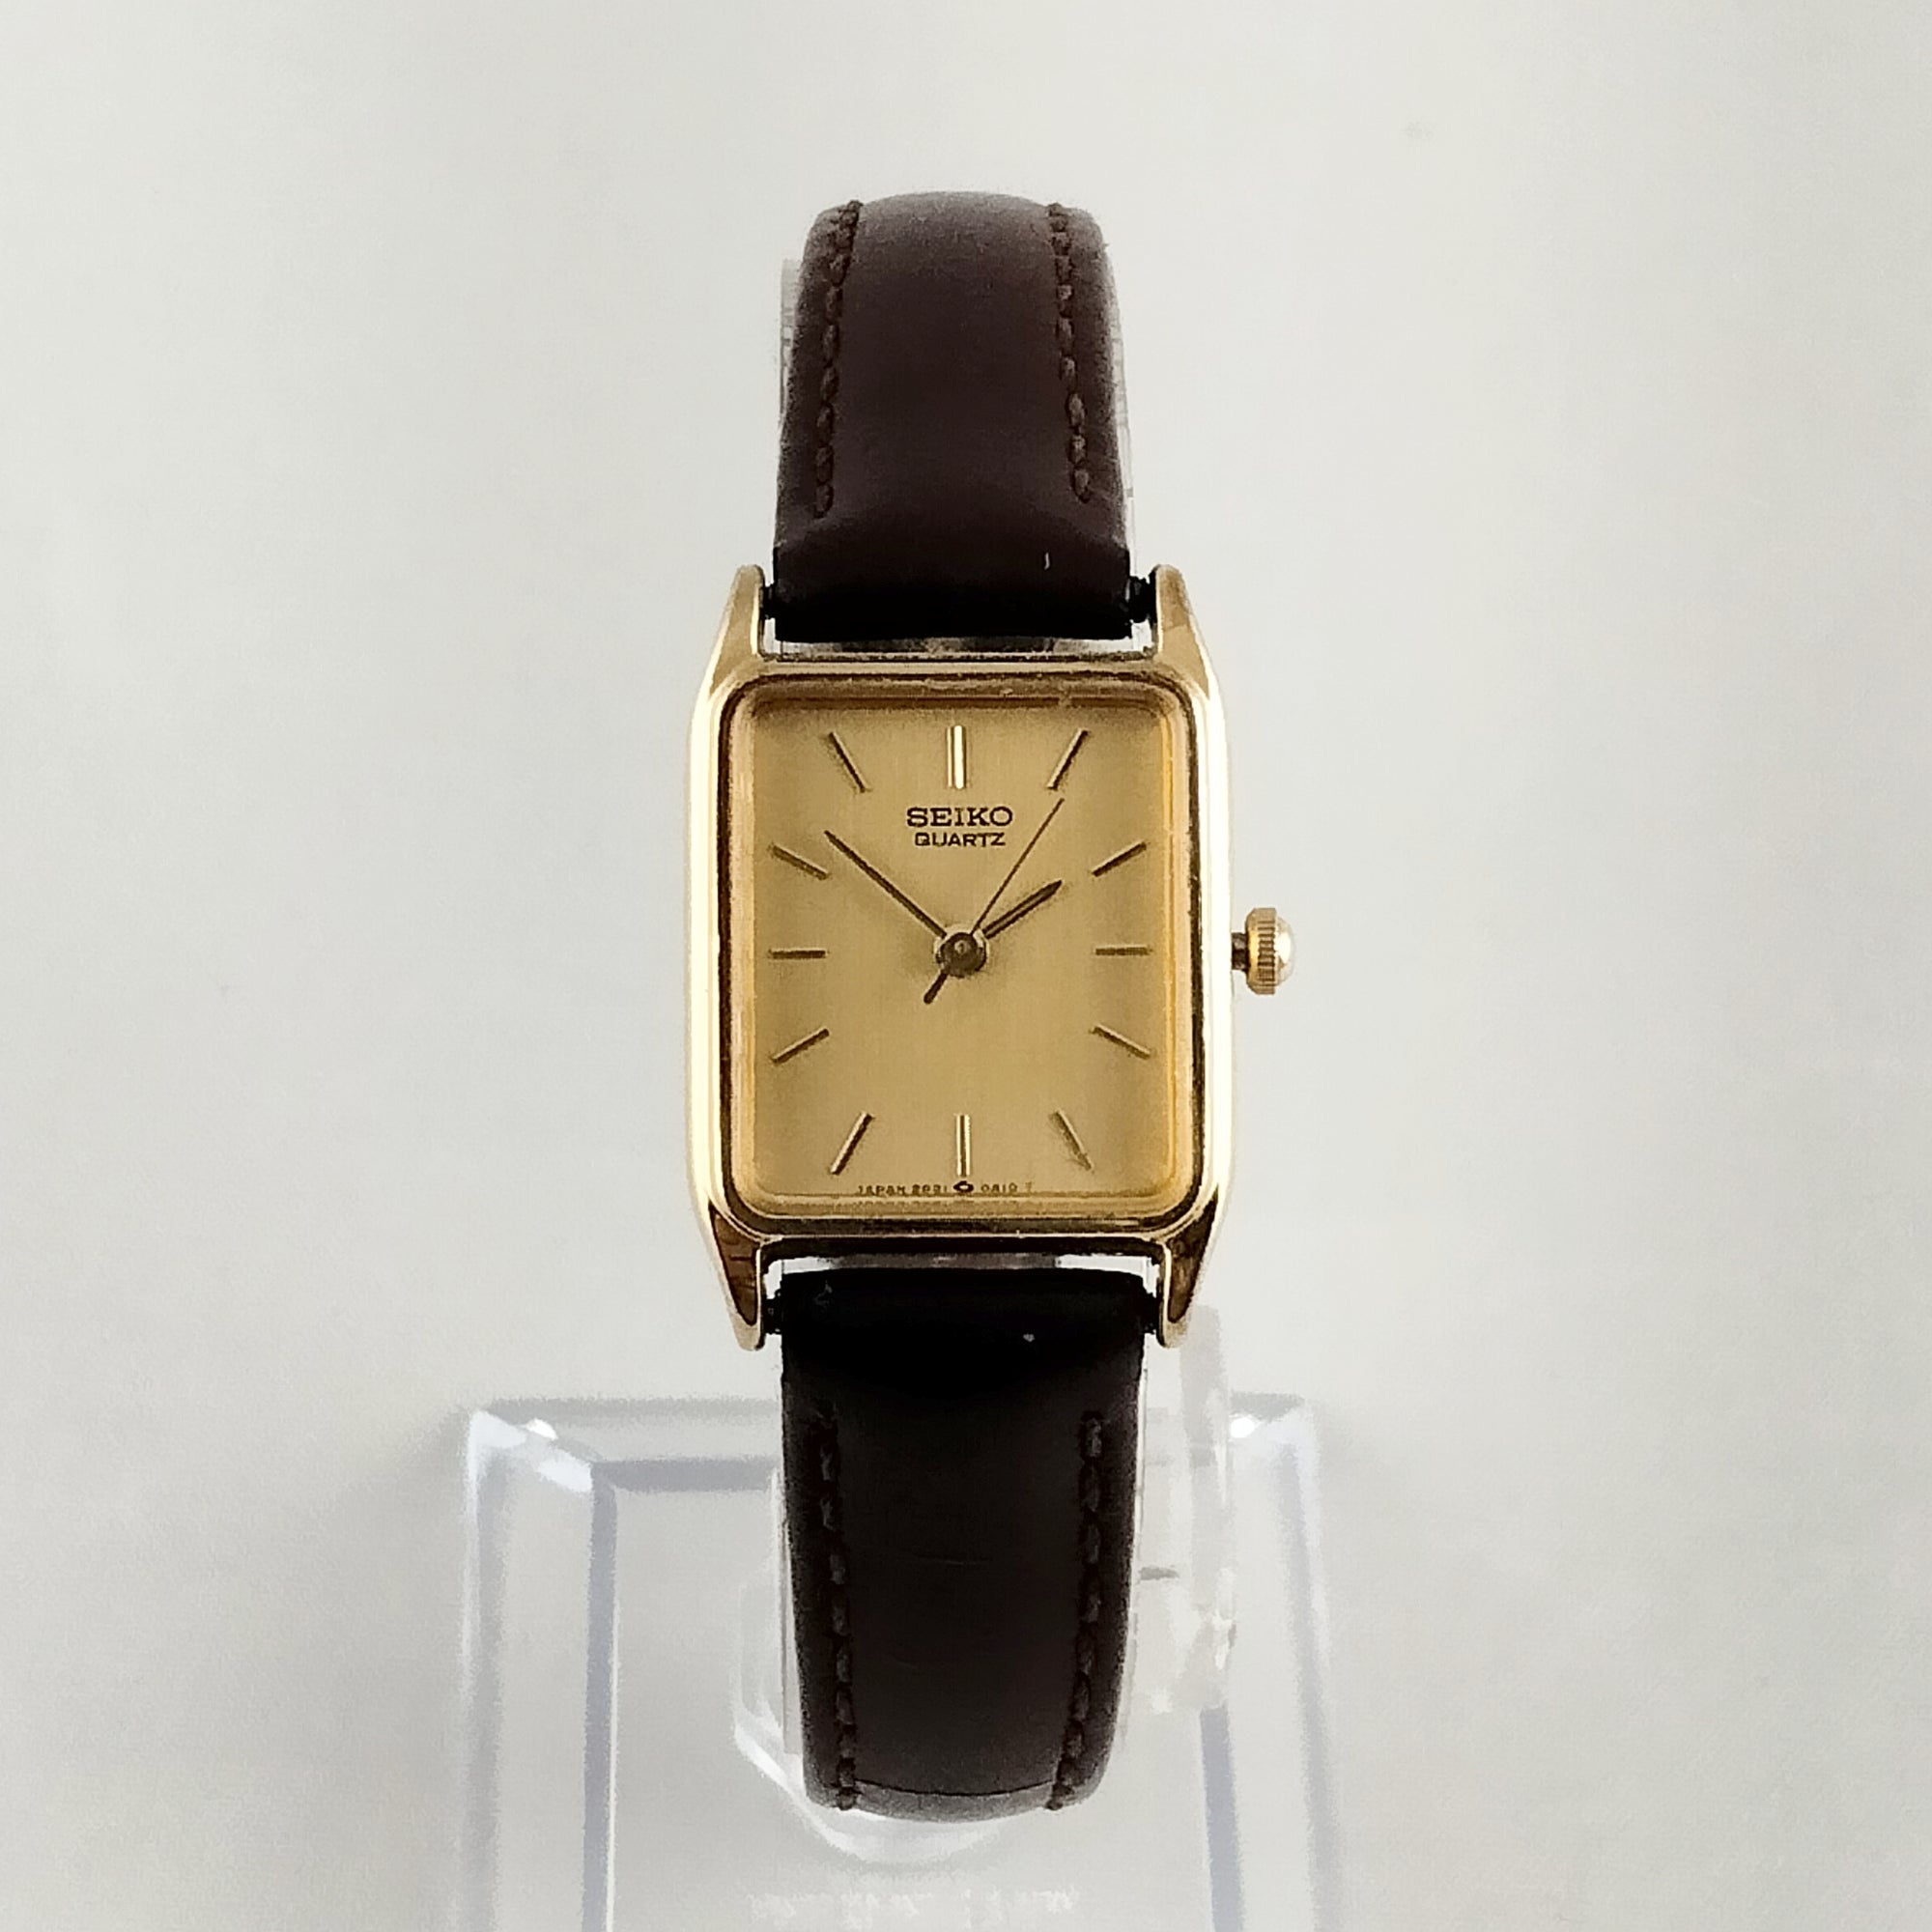 Seiko Unisex Watch, Square Gold Tone Dial, Genuine Brown Leather Strap